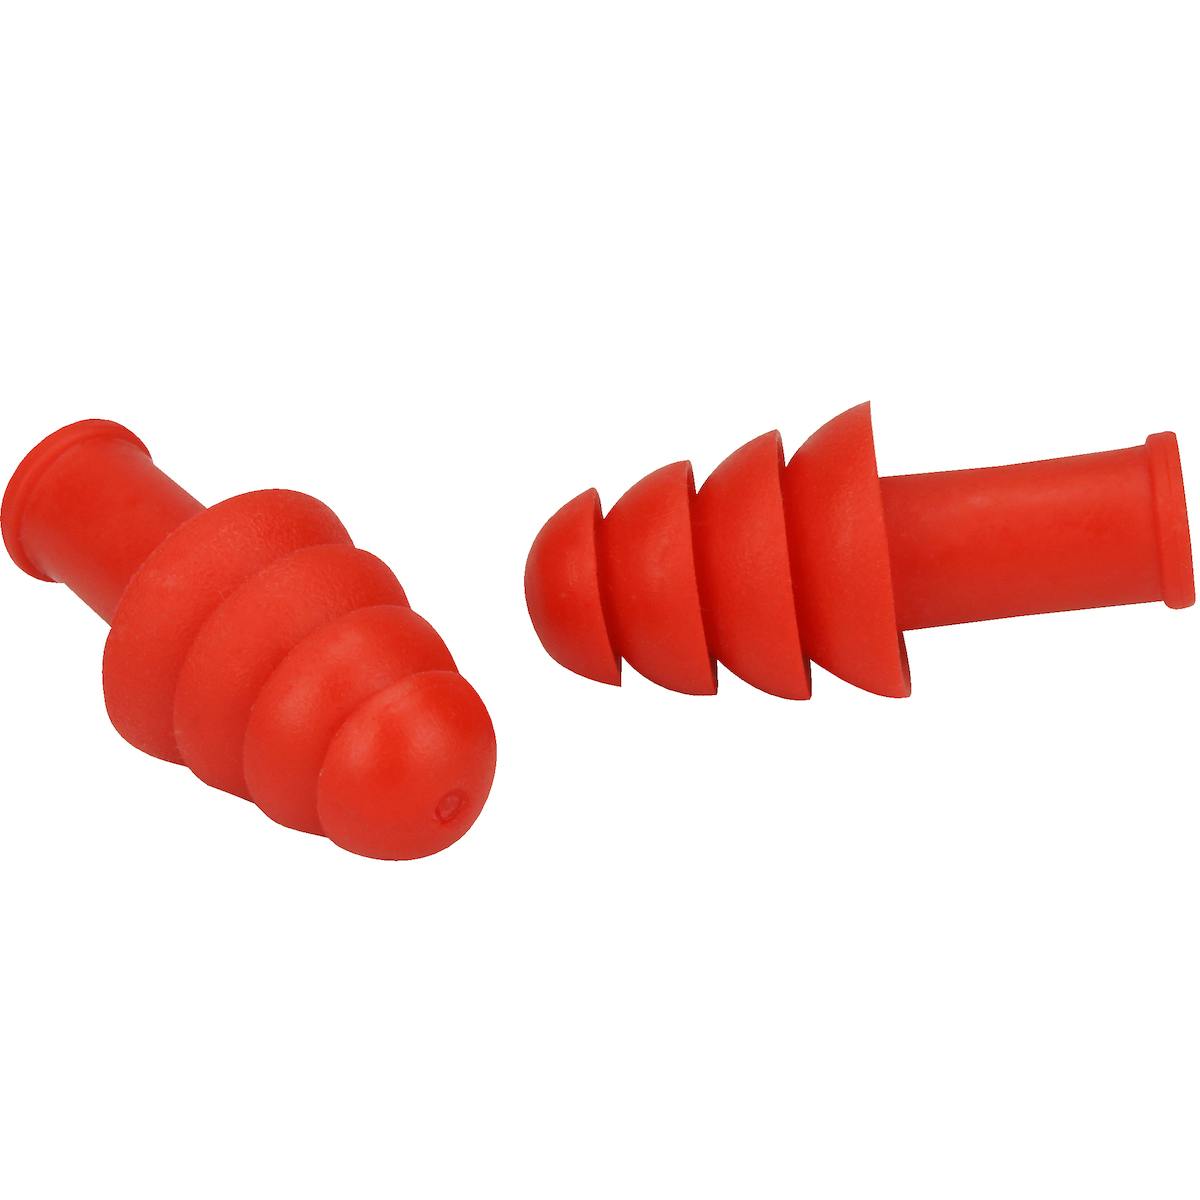 Reusable TPR Ear Plugs - NRR 27, Red (267-HPR410) - OS